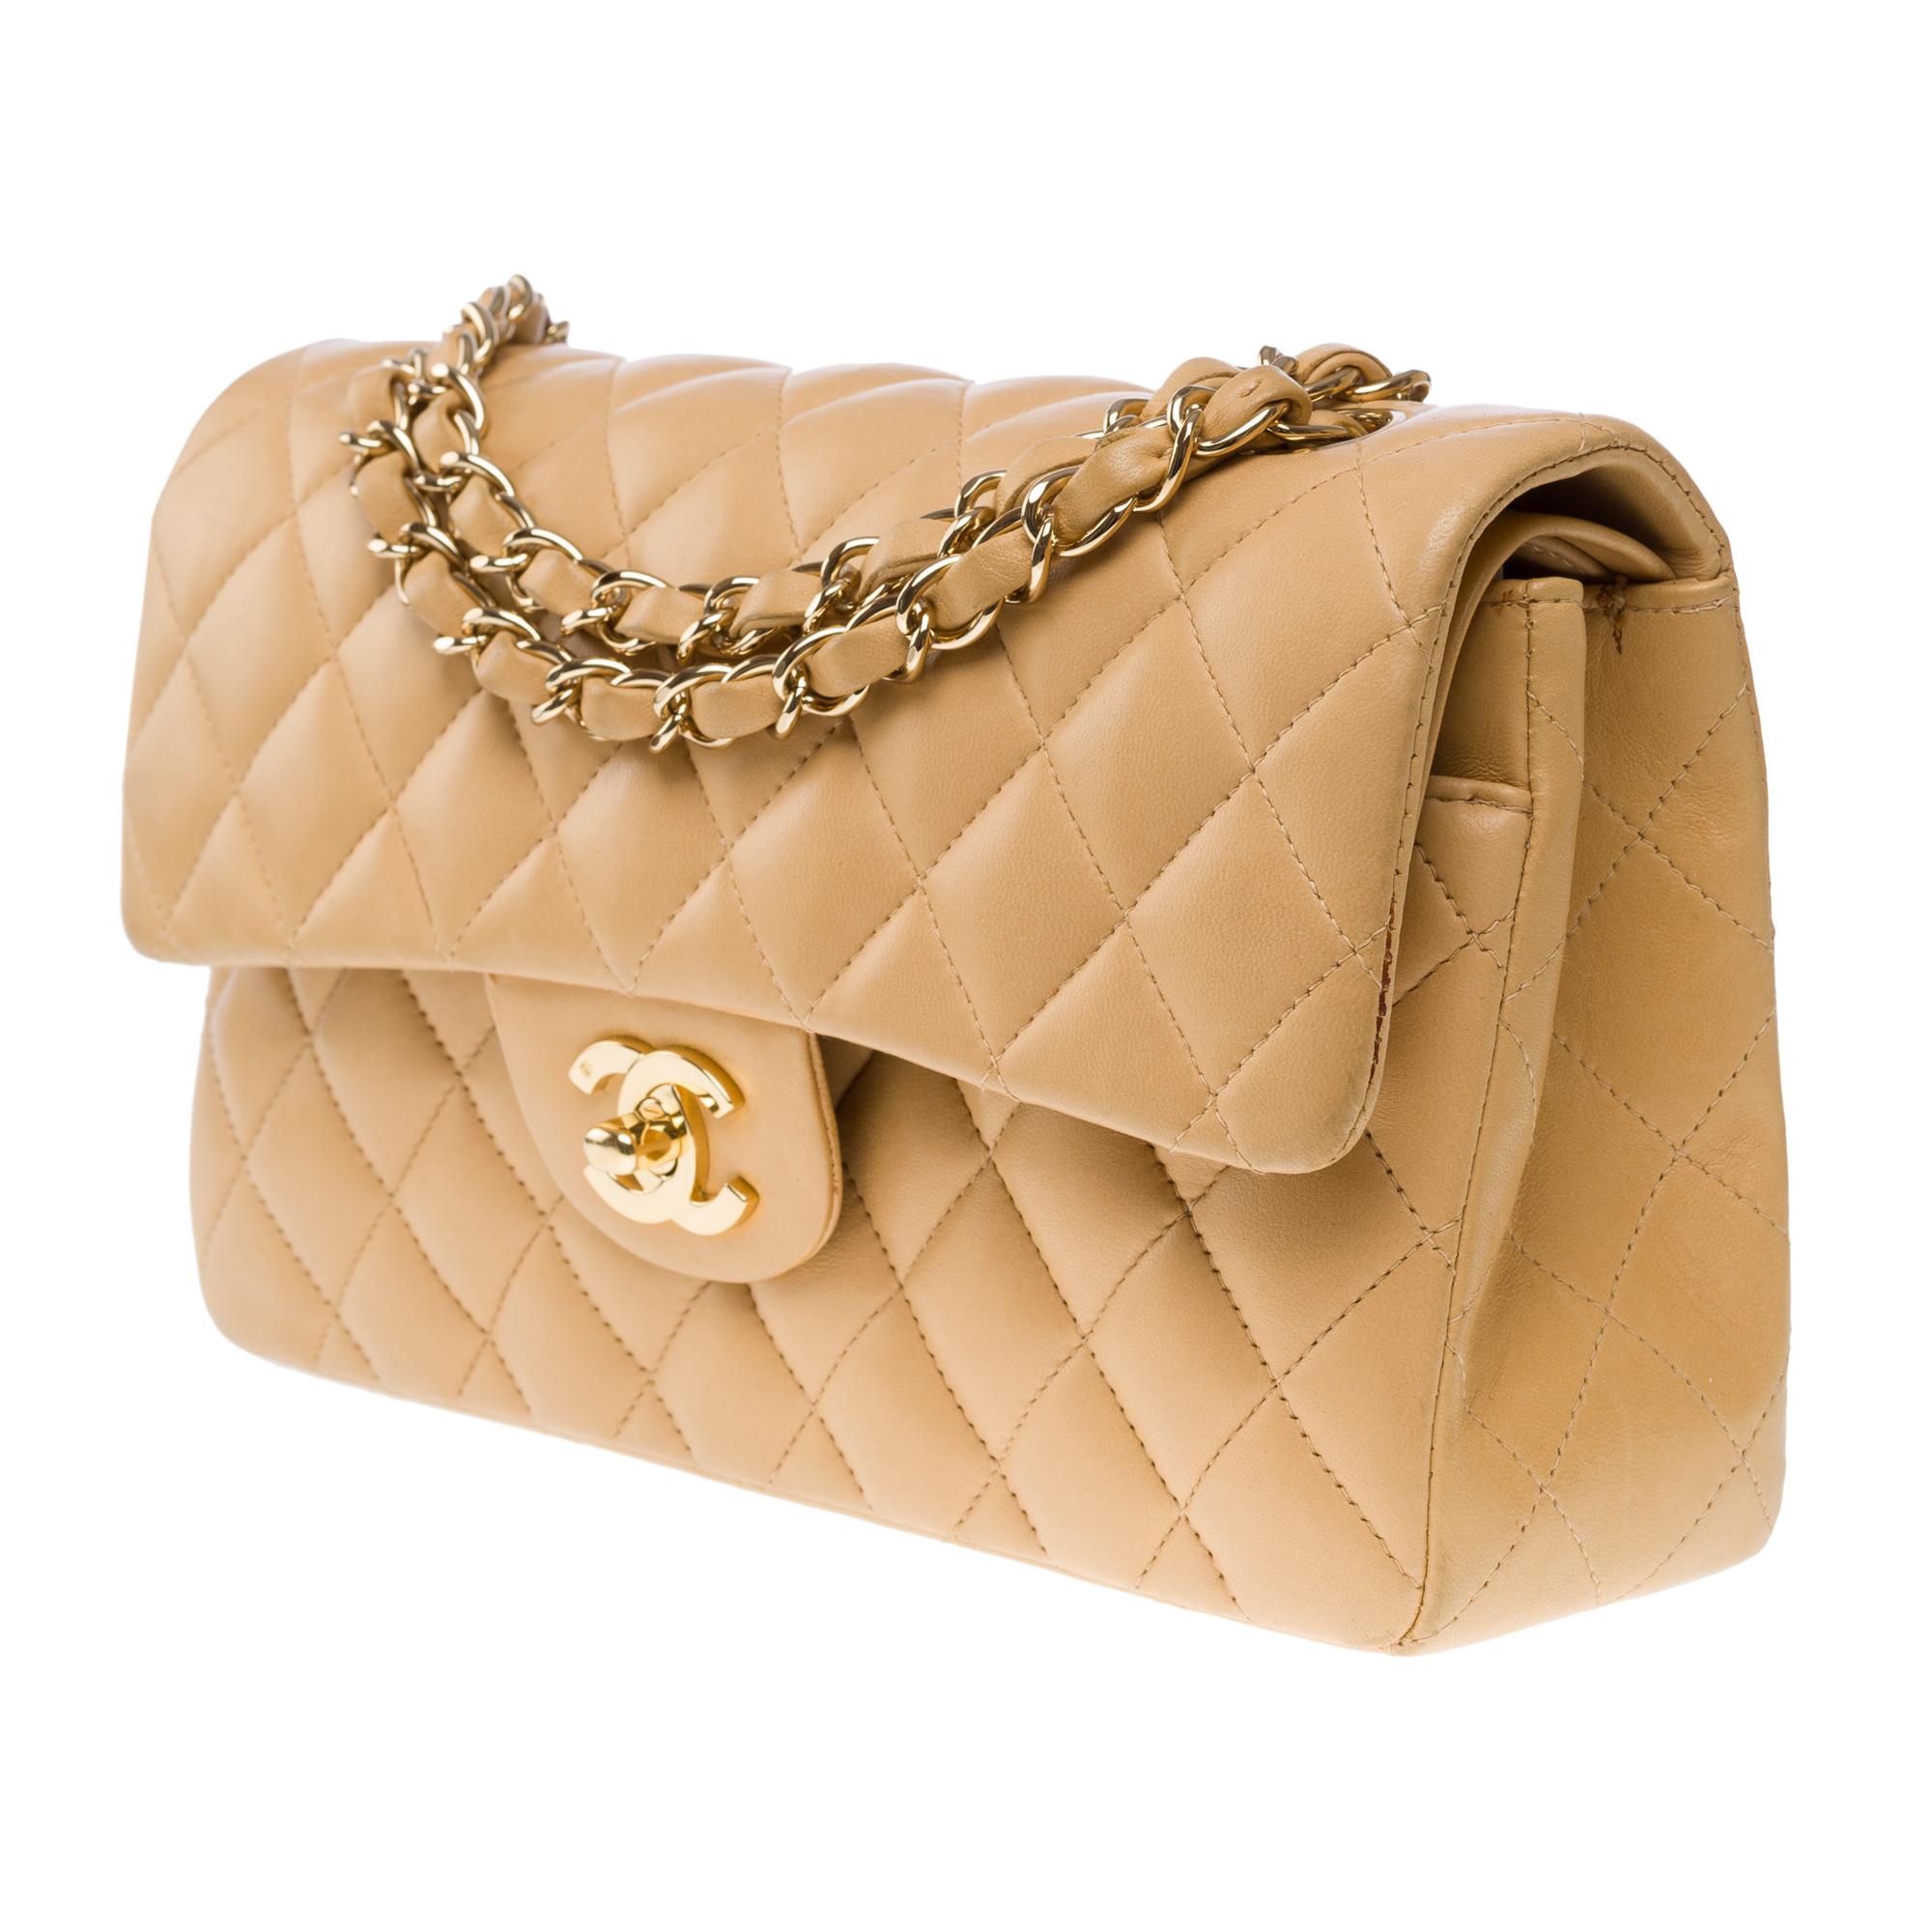 Chanel Timeless 23cm double flap shoulder bag in beige quilted lambskin, GHW For Sale 1